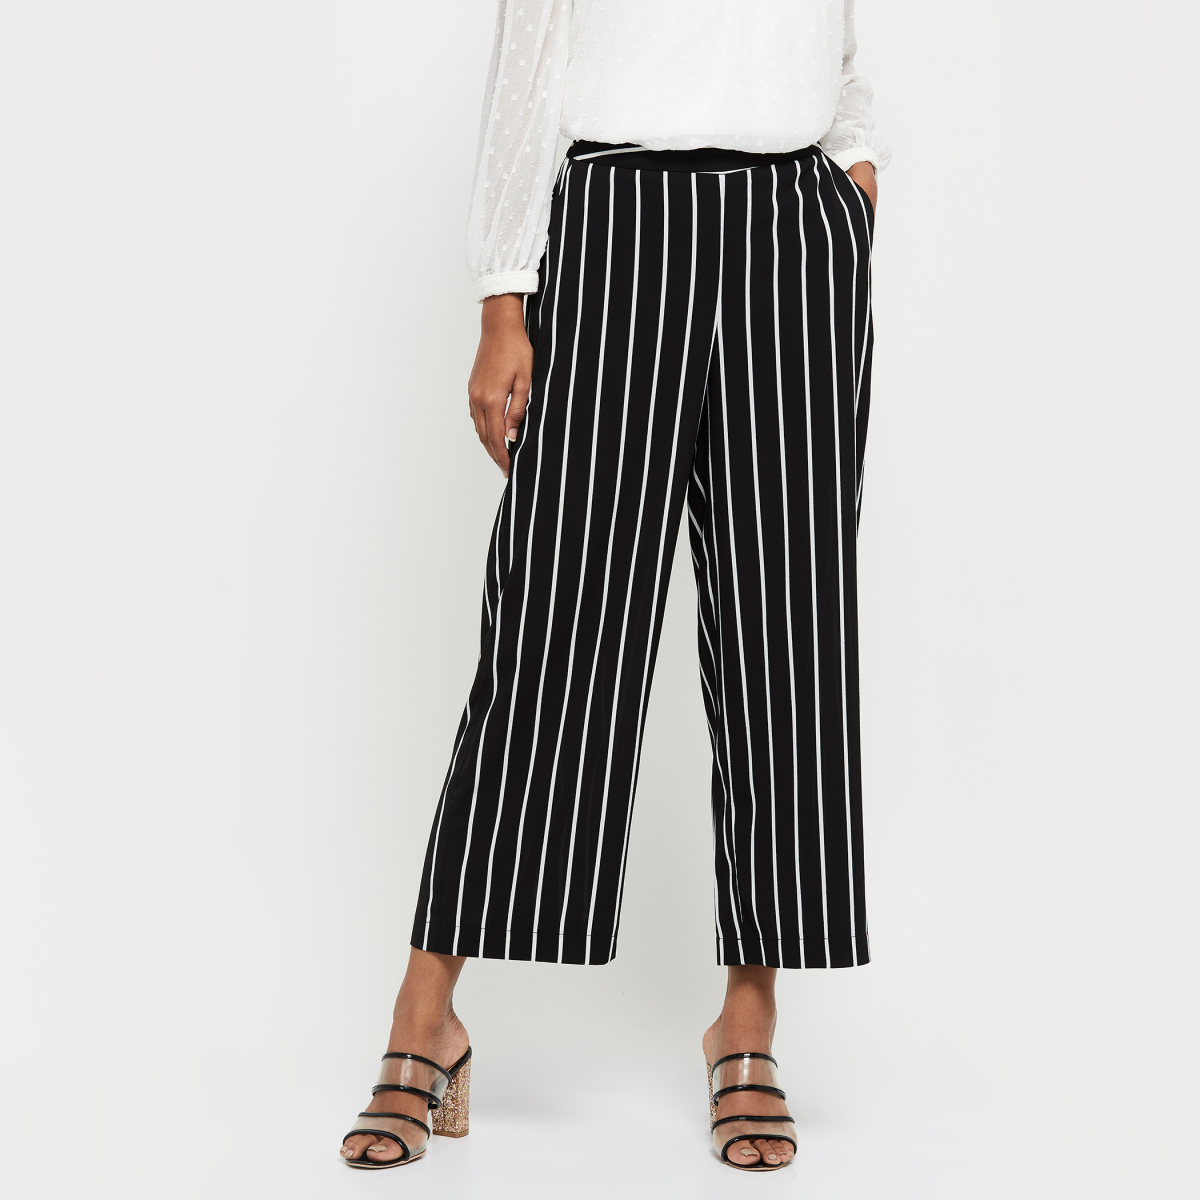 Get Contrast Striped Wide Leg Trousers at  1090  LBB Shop